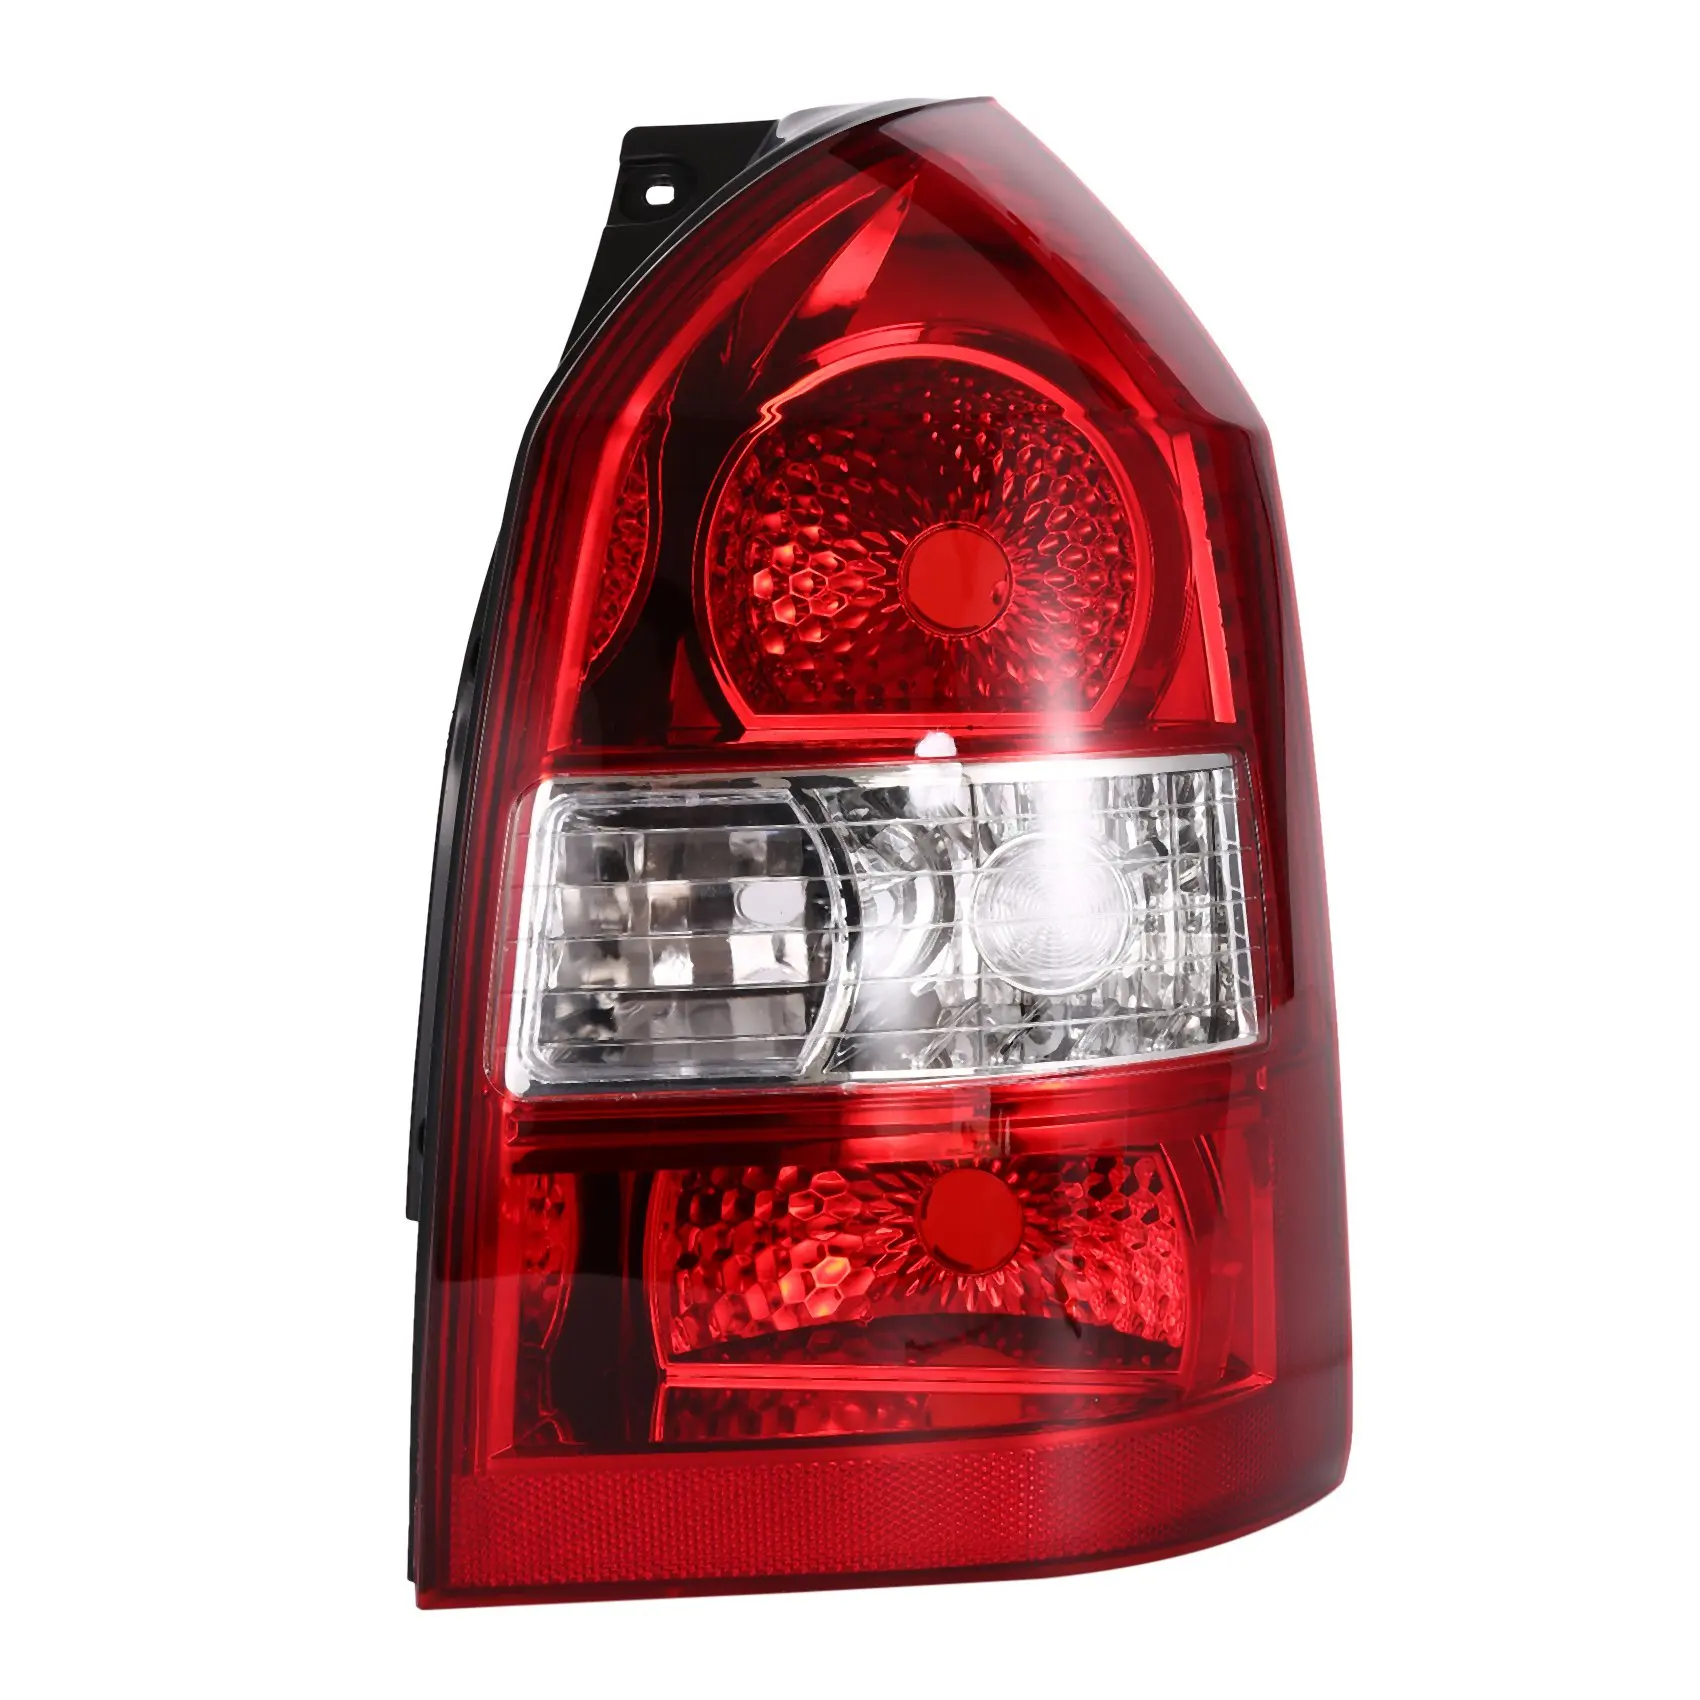 

Right Car Tail Lights Rear Lamp Shell Reversing Brake Lampshade Housing Without Bulb for Hyundai Tucson 2005 - 2010